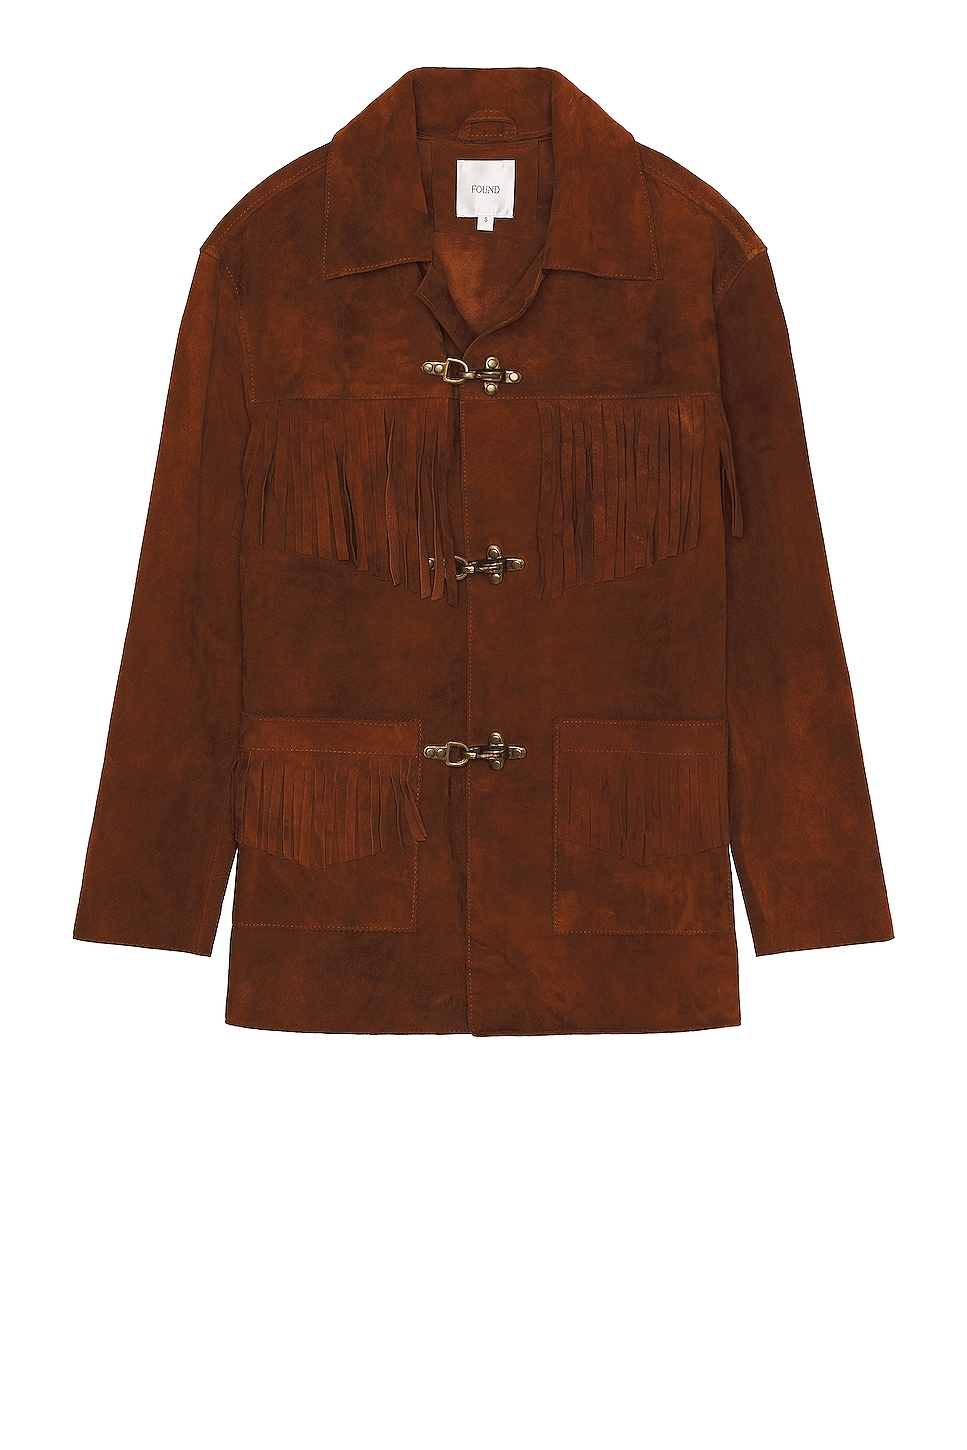 Image 1 of Found Suede Fringe Jacket in Tan